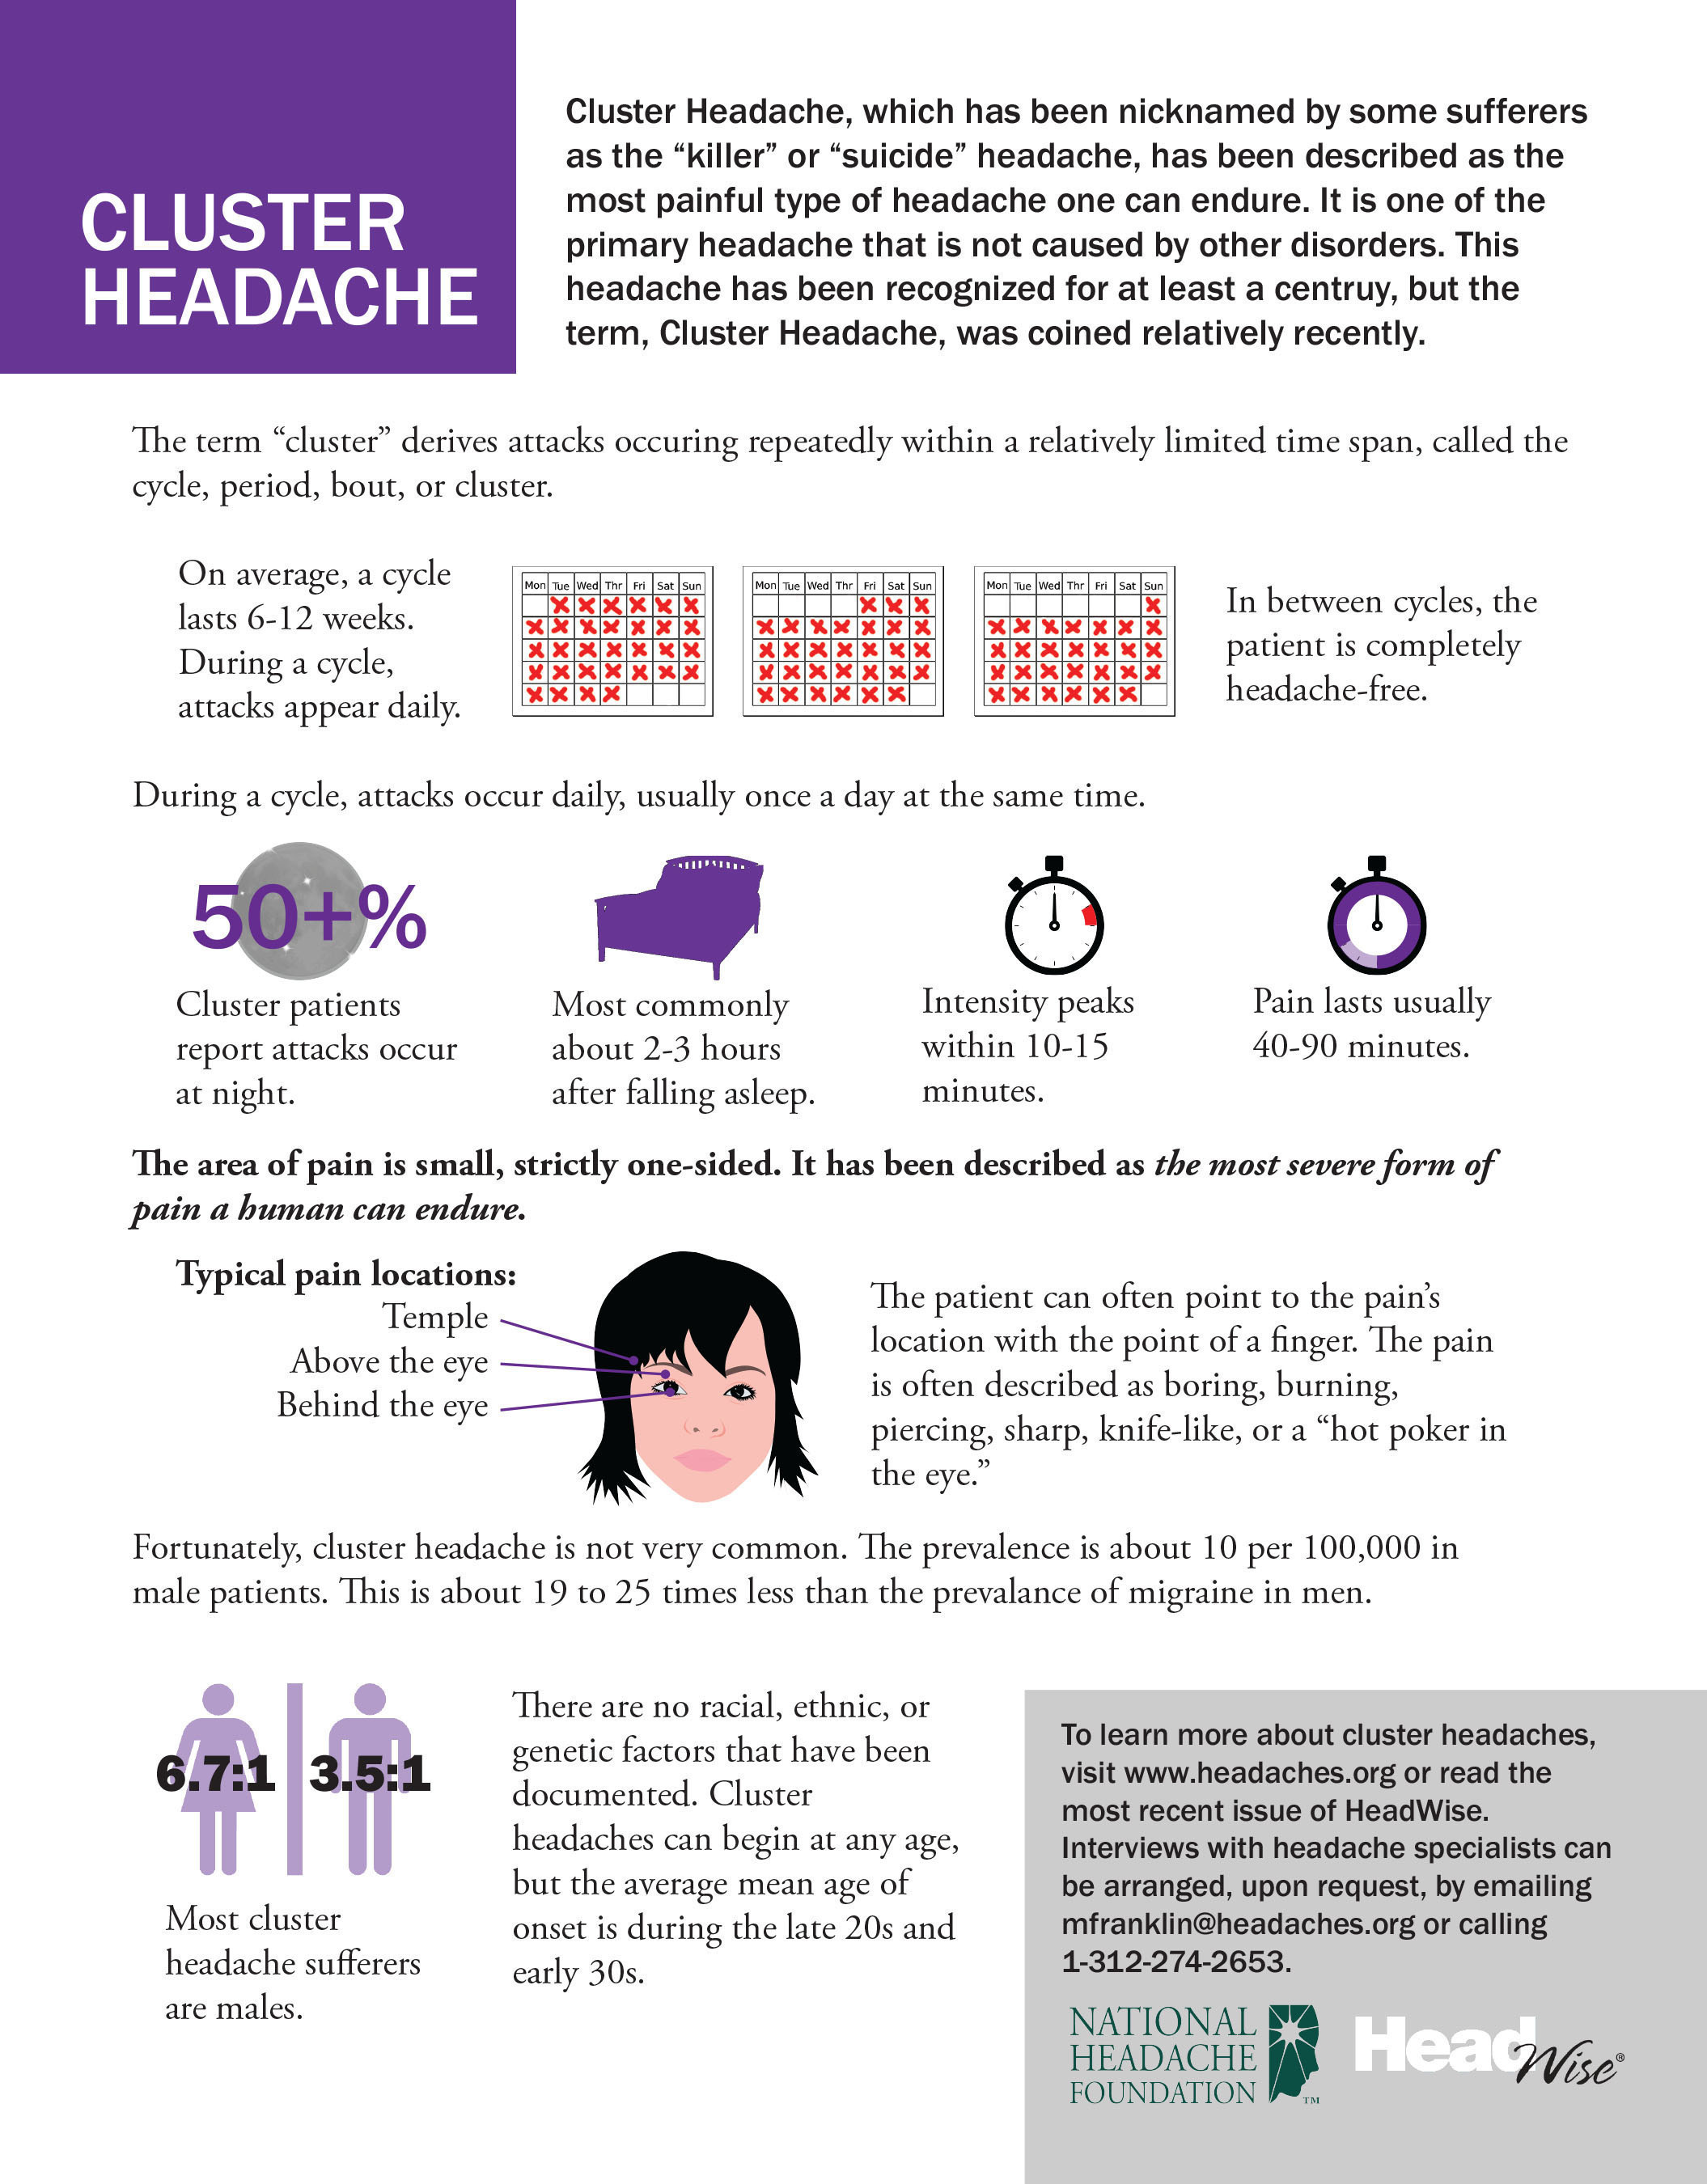 Cluster headache, which has been nicknamed by some sufferers as the "killer" or "suicide" headache, has been described as the most painful type of headache one can endure.